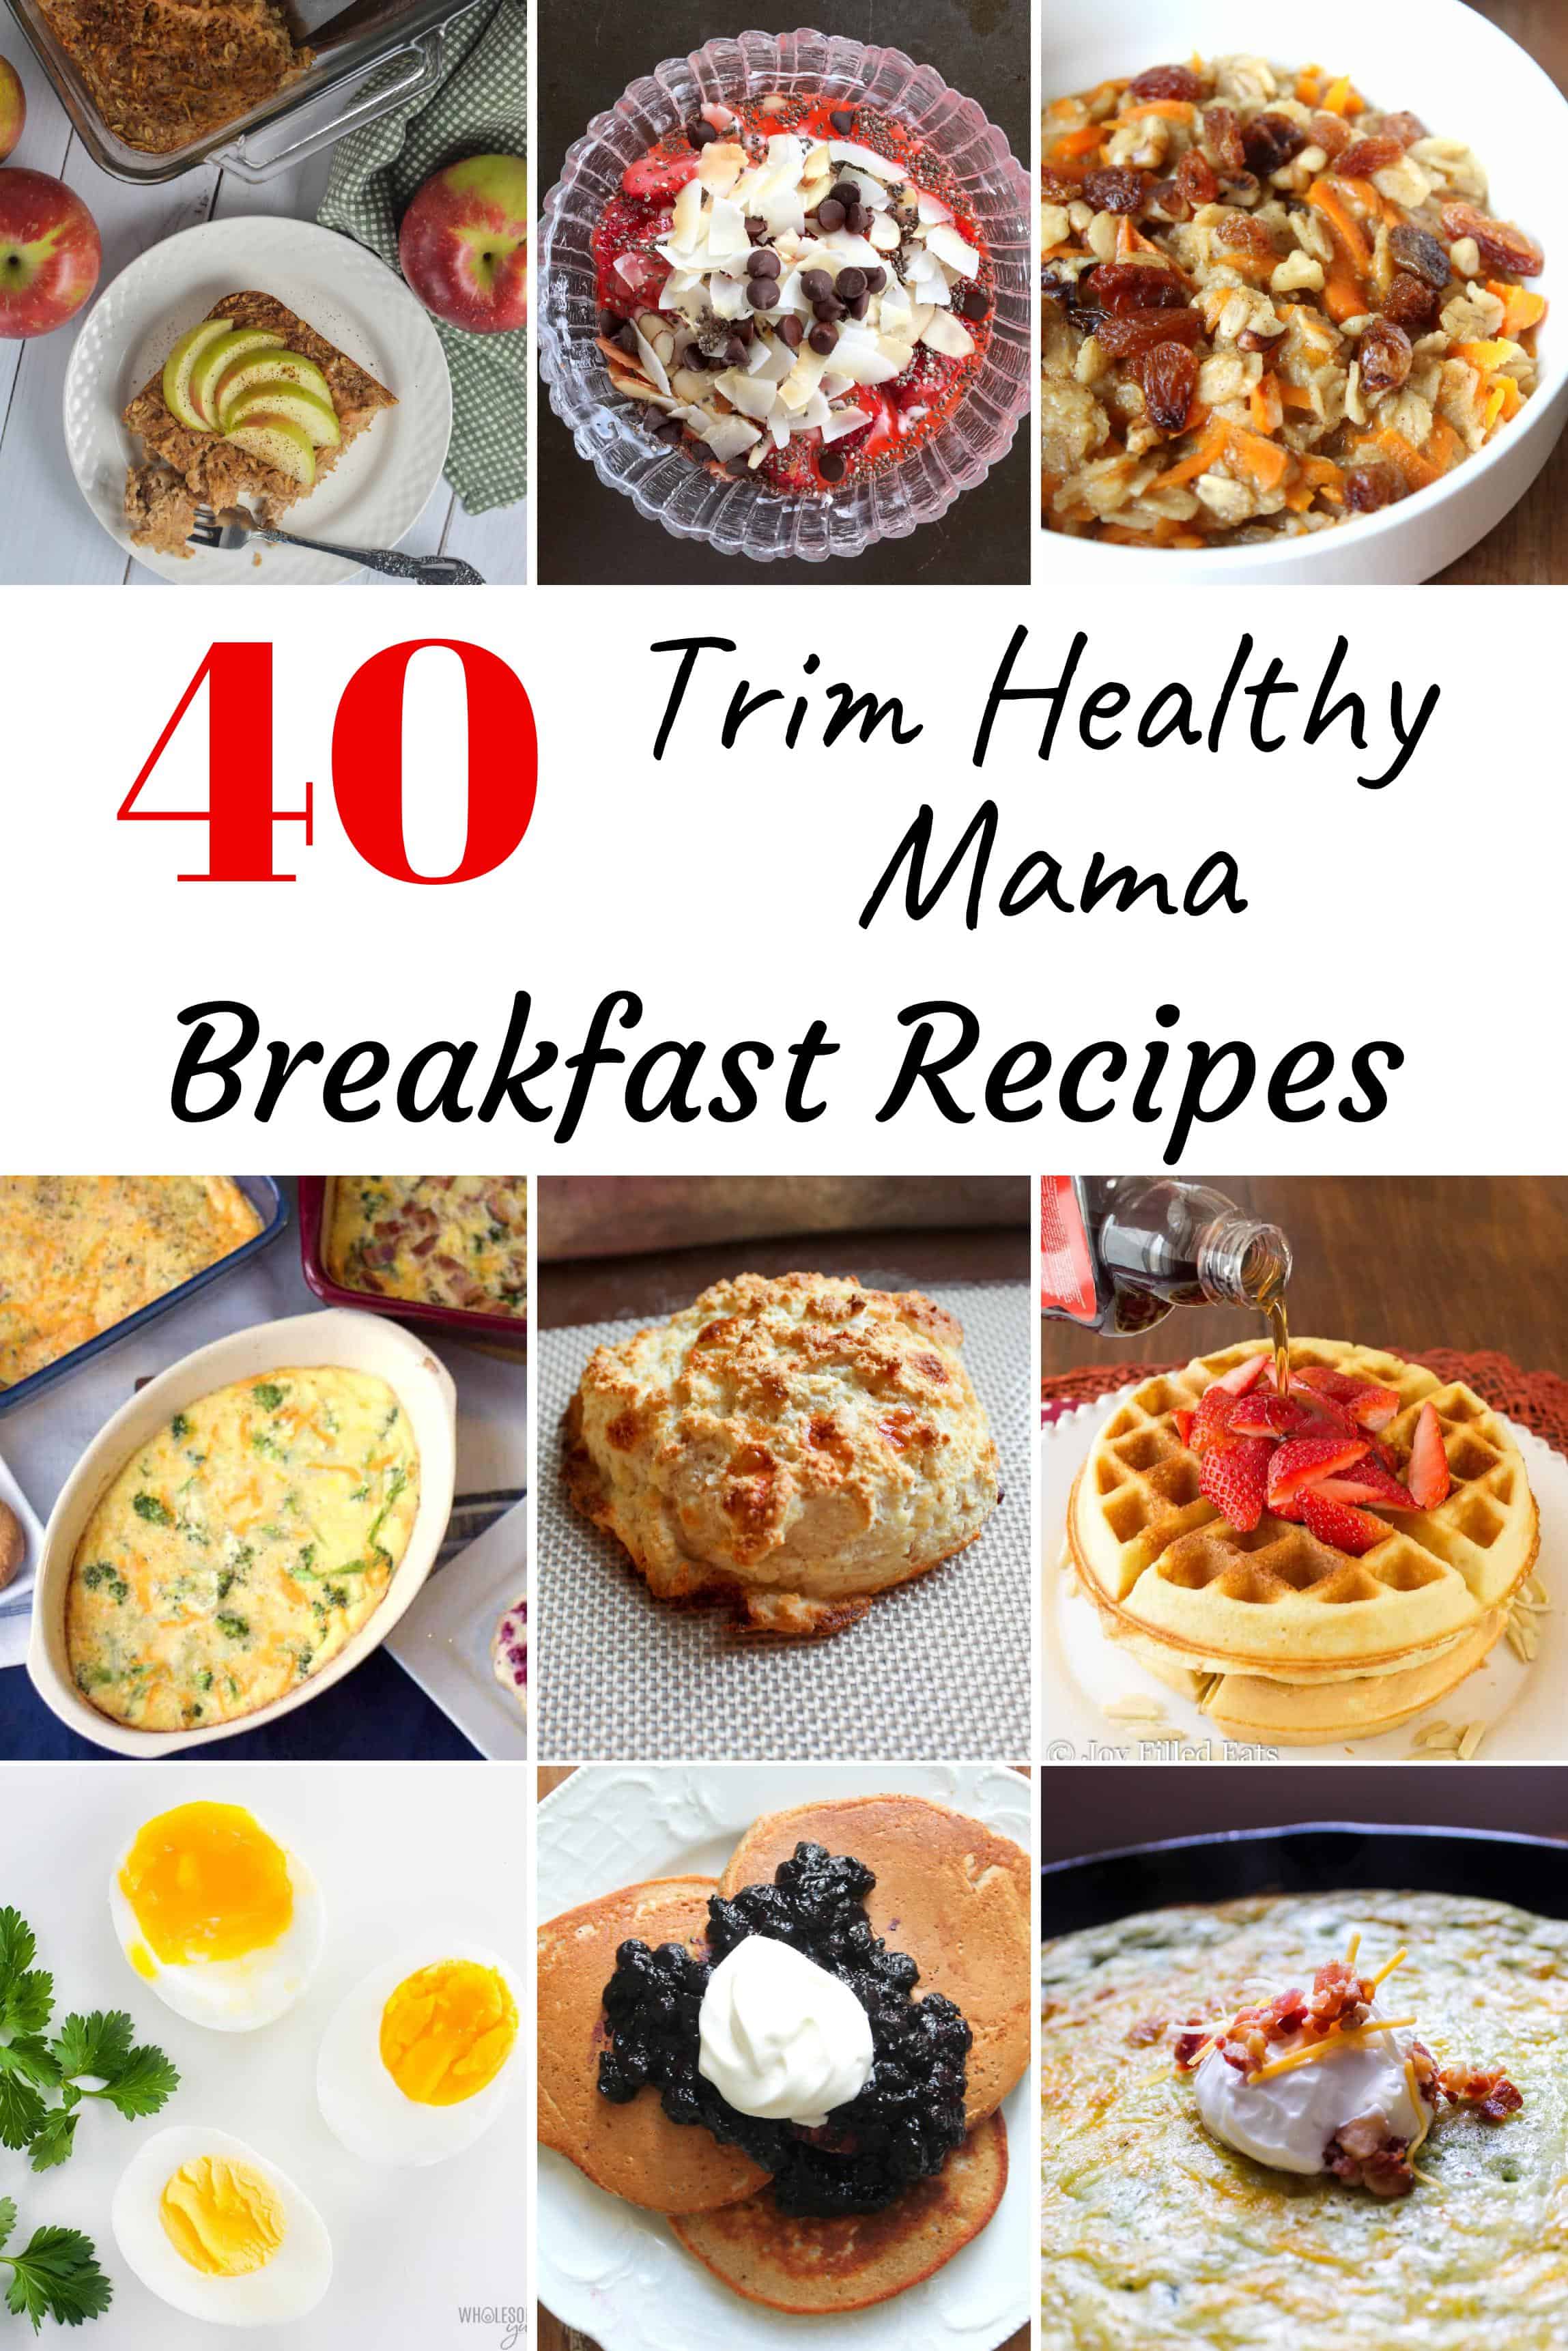 Looking for healthy Trim Healthy Mama Breakfast recipes? Here is a great roundup that includes breakfasts of all fuel types. Smoothies, Shakes, Eggs, Waffles, Biscuits, THM Breakfast Casseroles, and more! #trimhealthymam #thm #thmbreakfast #healthybreakfast #breakfastideas #breakfastrecipes